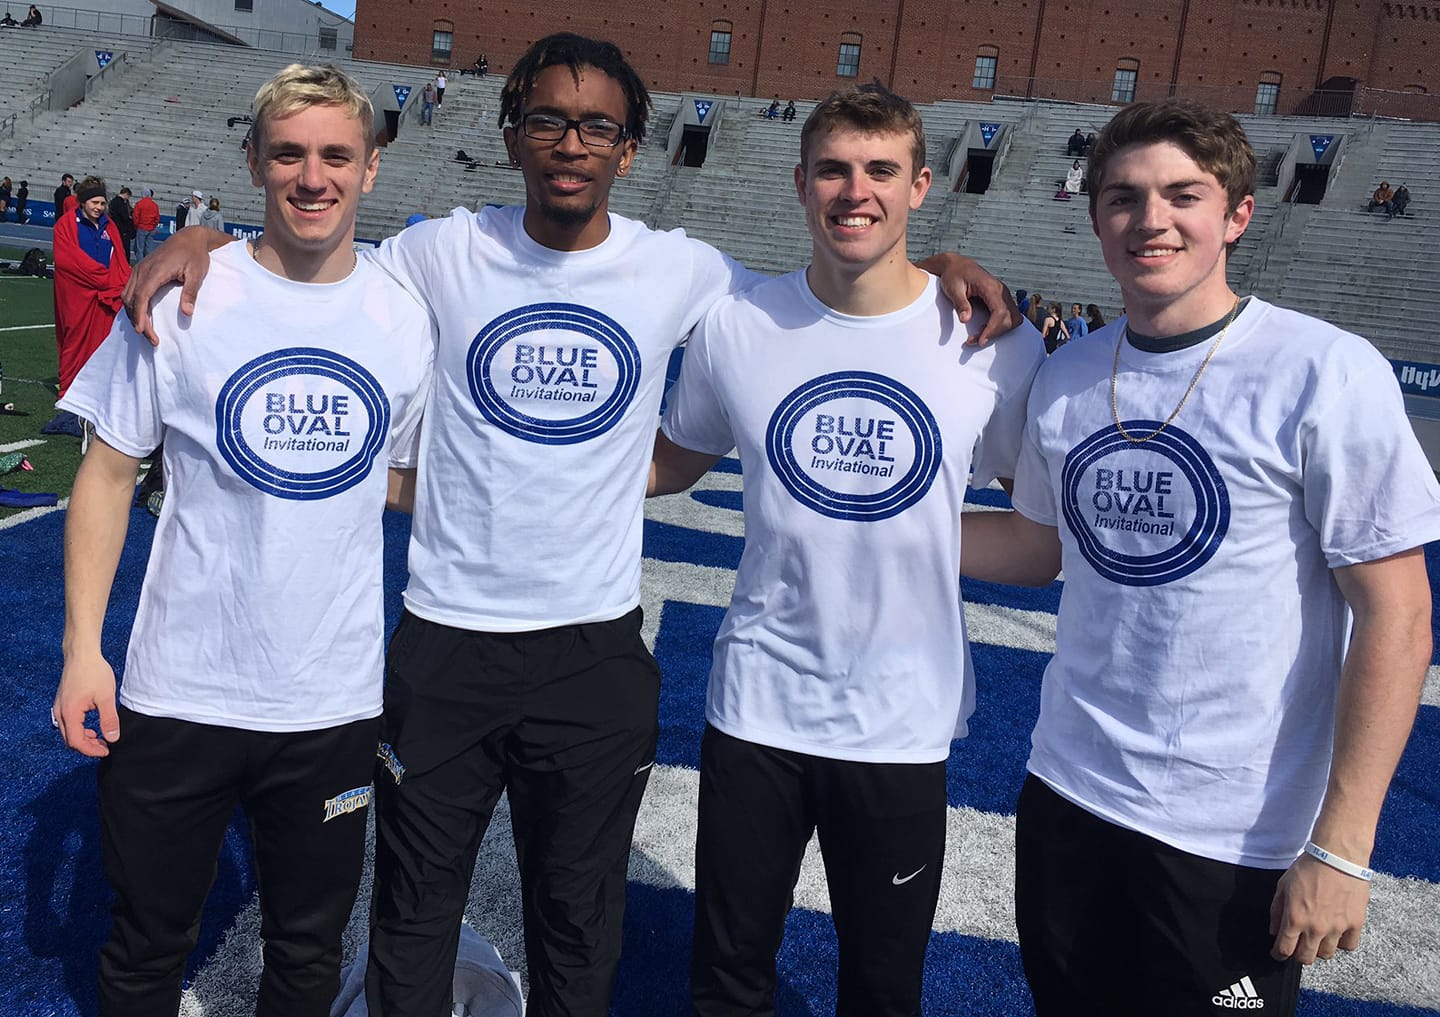 NIACC's Kalen Eastman, Timothi McMaster, Kyle Younker and Brendan Hoy qualified for the Drake Relays in the 4x100.